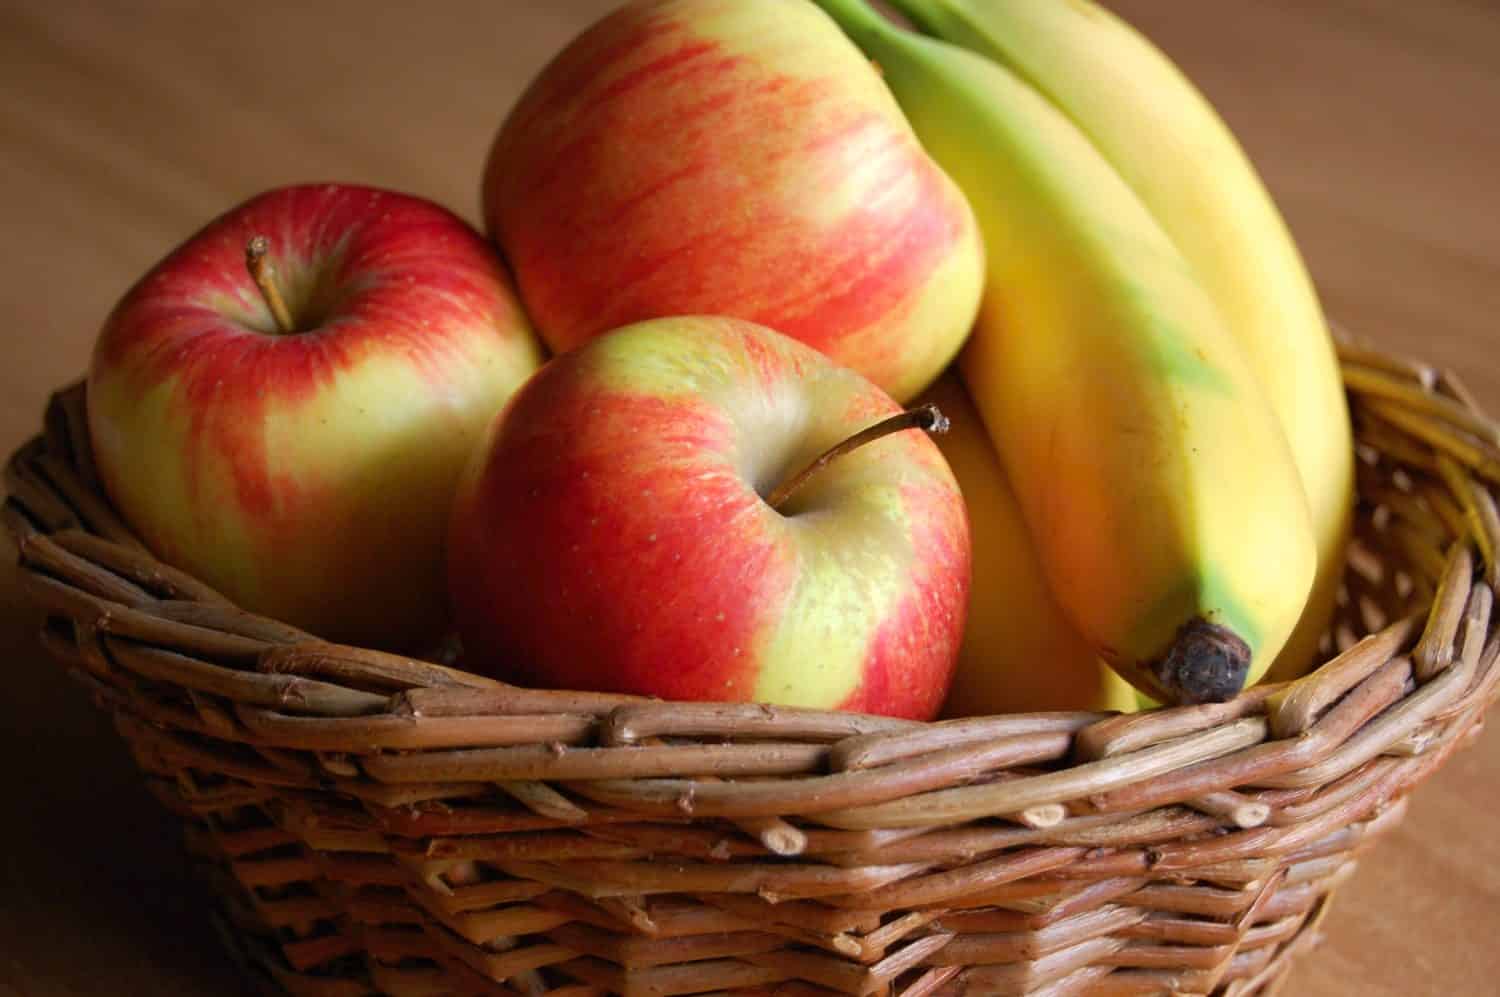 detail of apple and banana in wicker basket